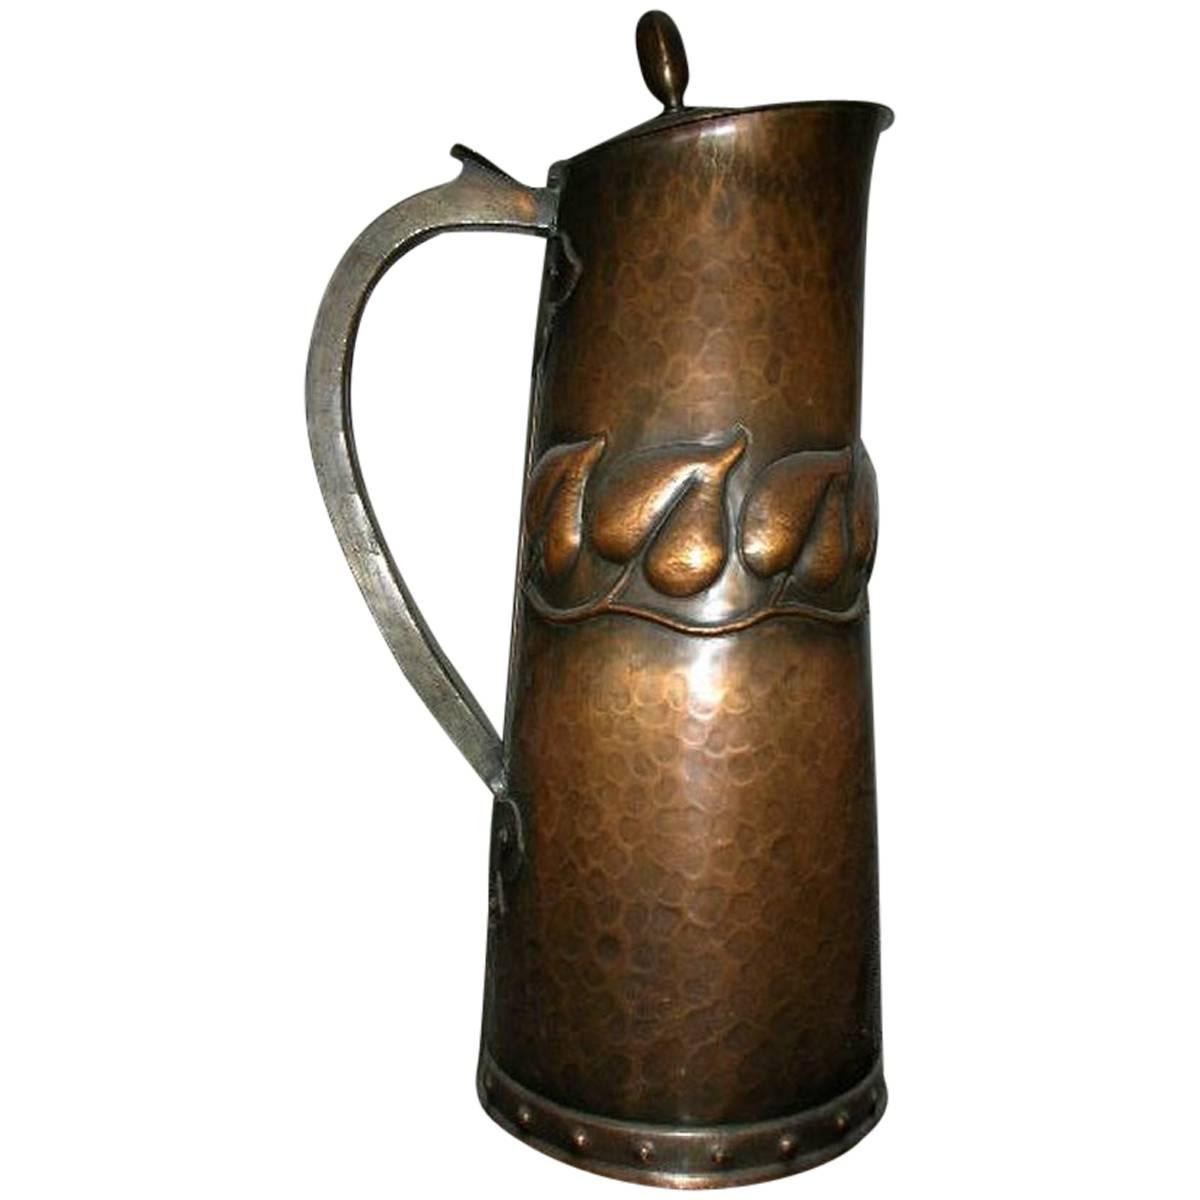 Arts & Crafts Copper Jug with Stylised Repousse Leaf Details